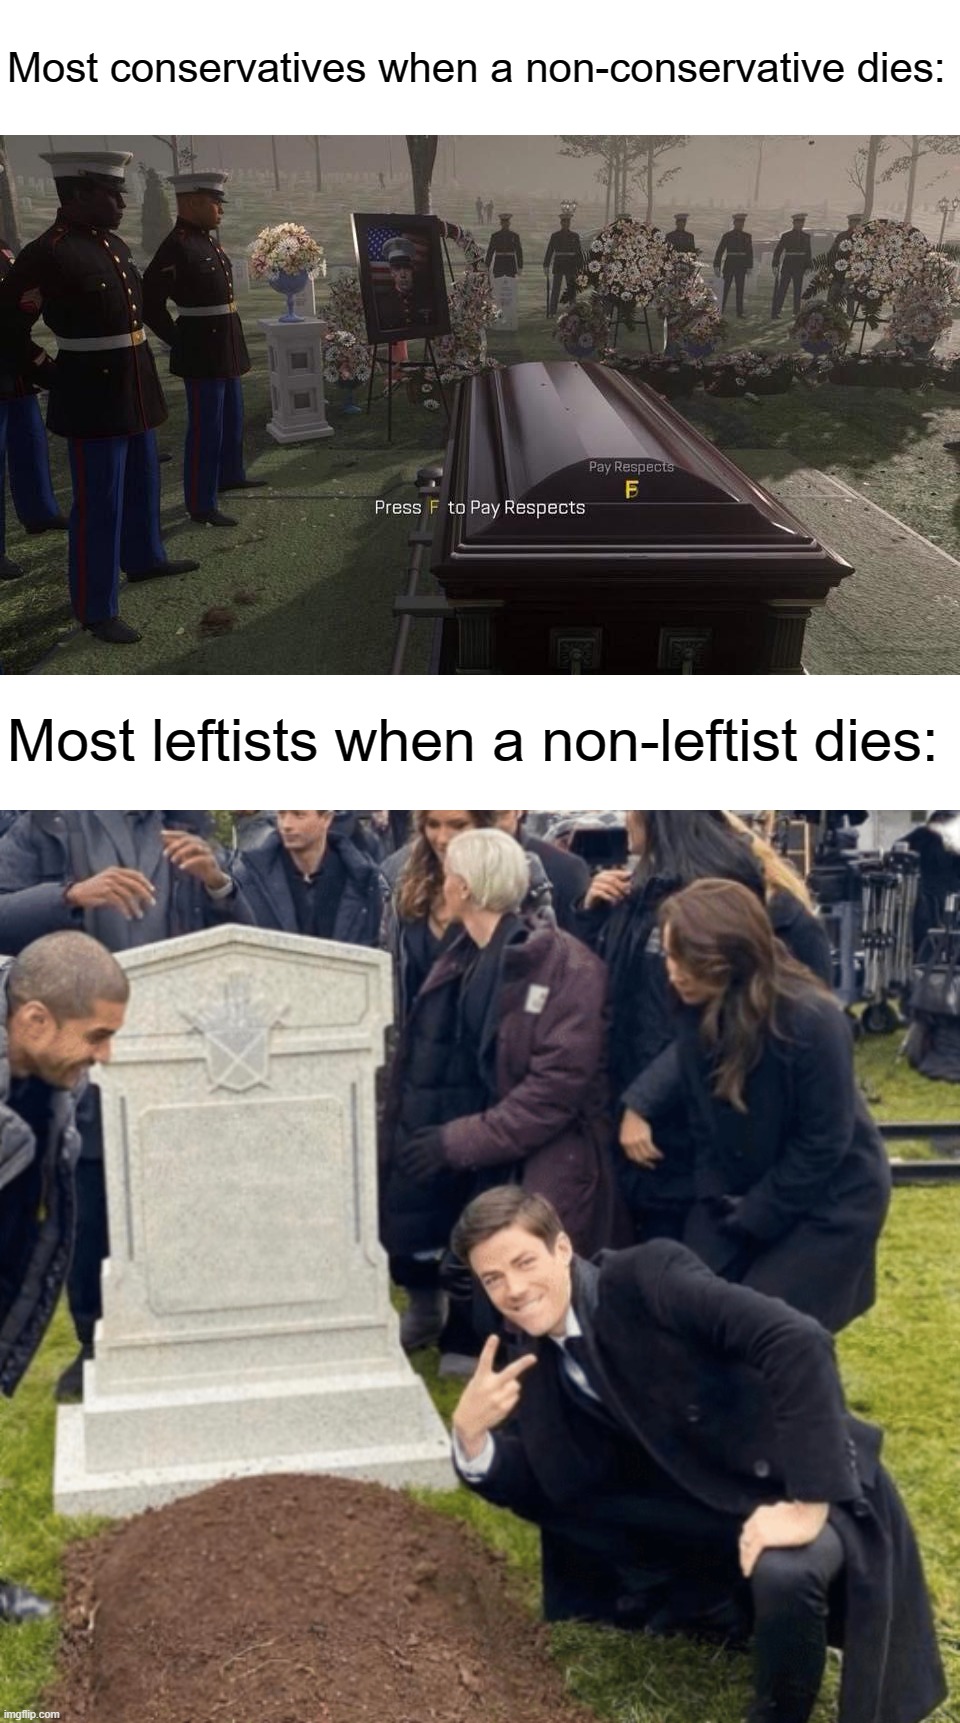 Five Years Ago The Press F To Pay Respects Meme Was Born Press F Meme